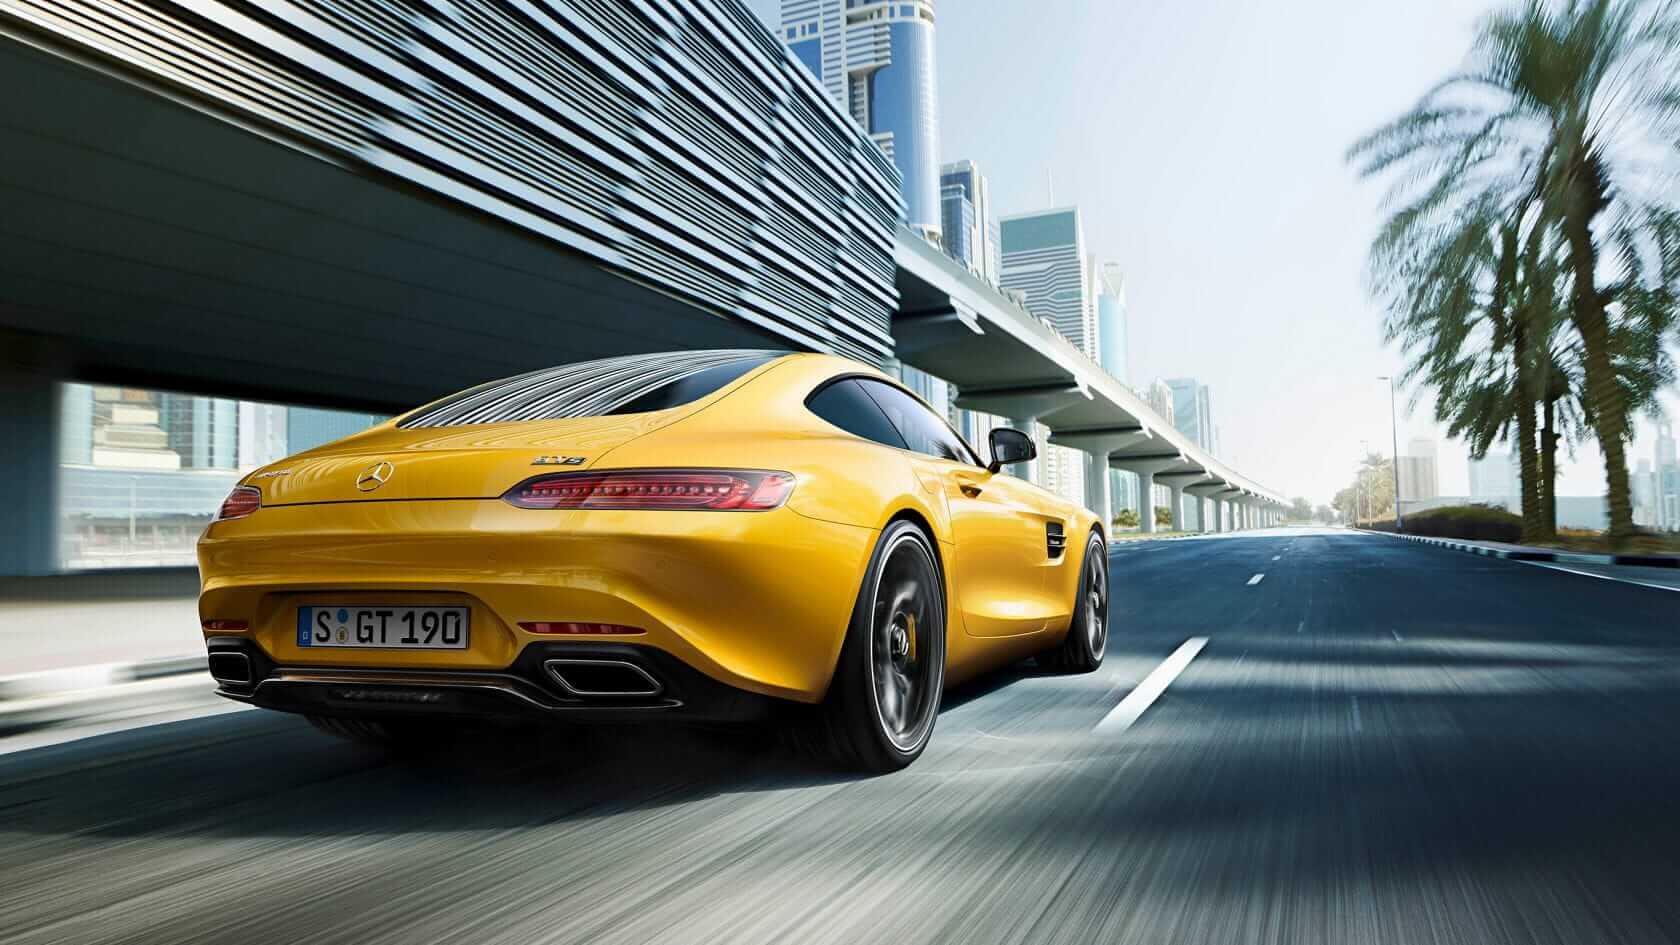 Mercedes AMG GT S rear view